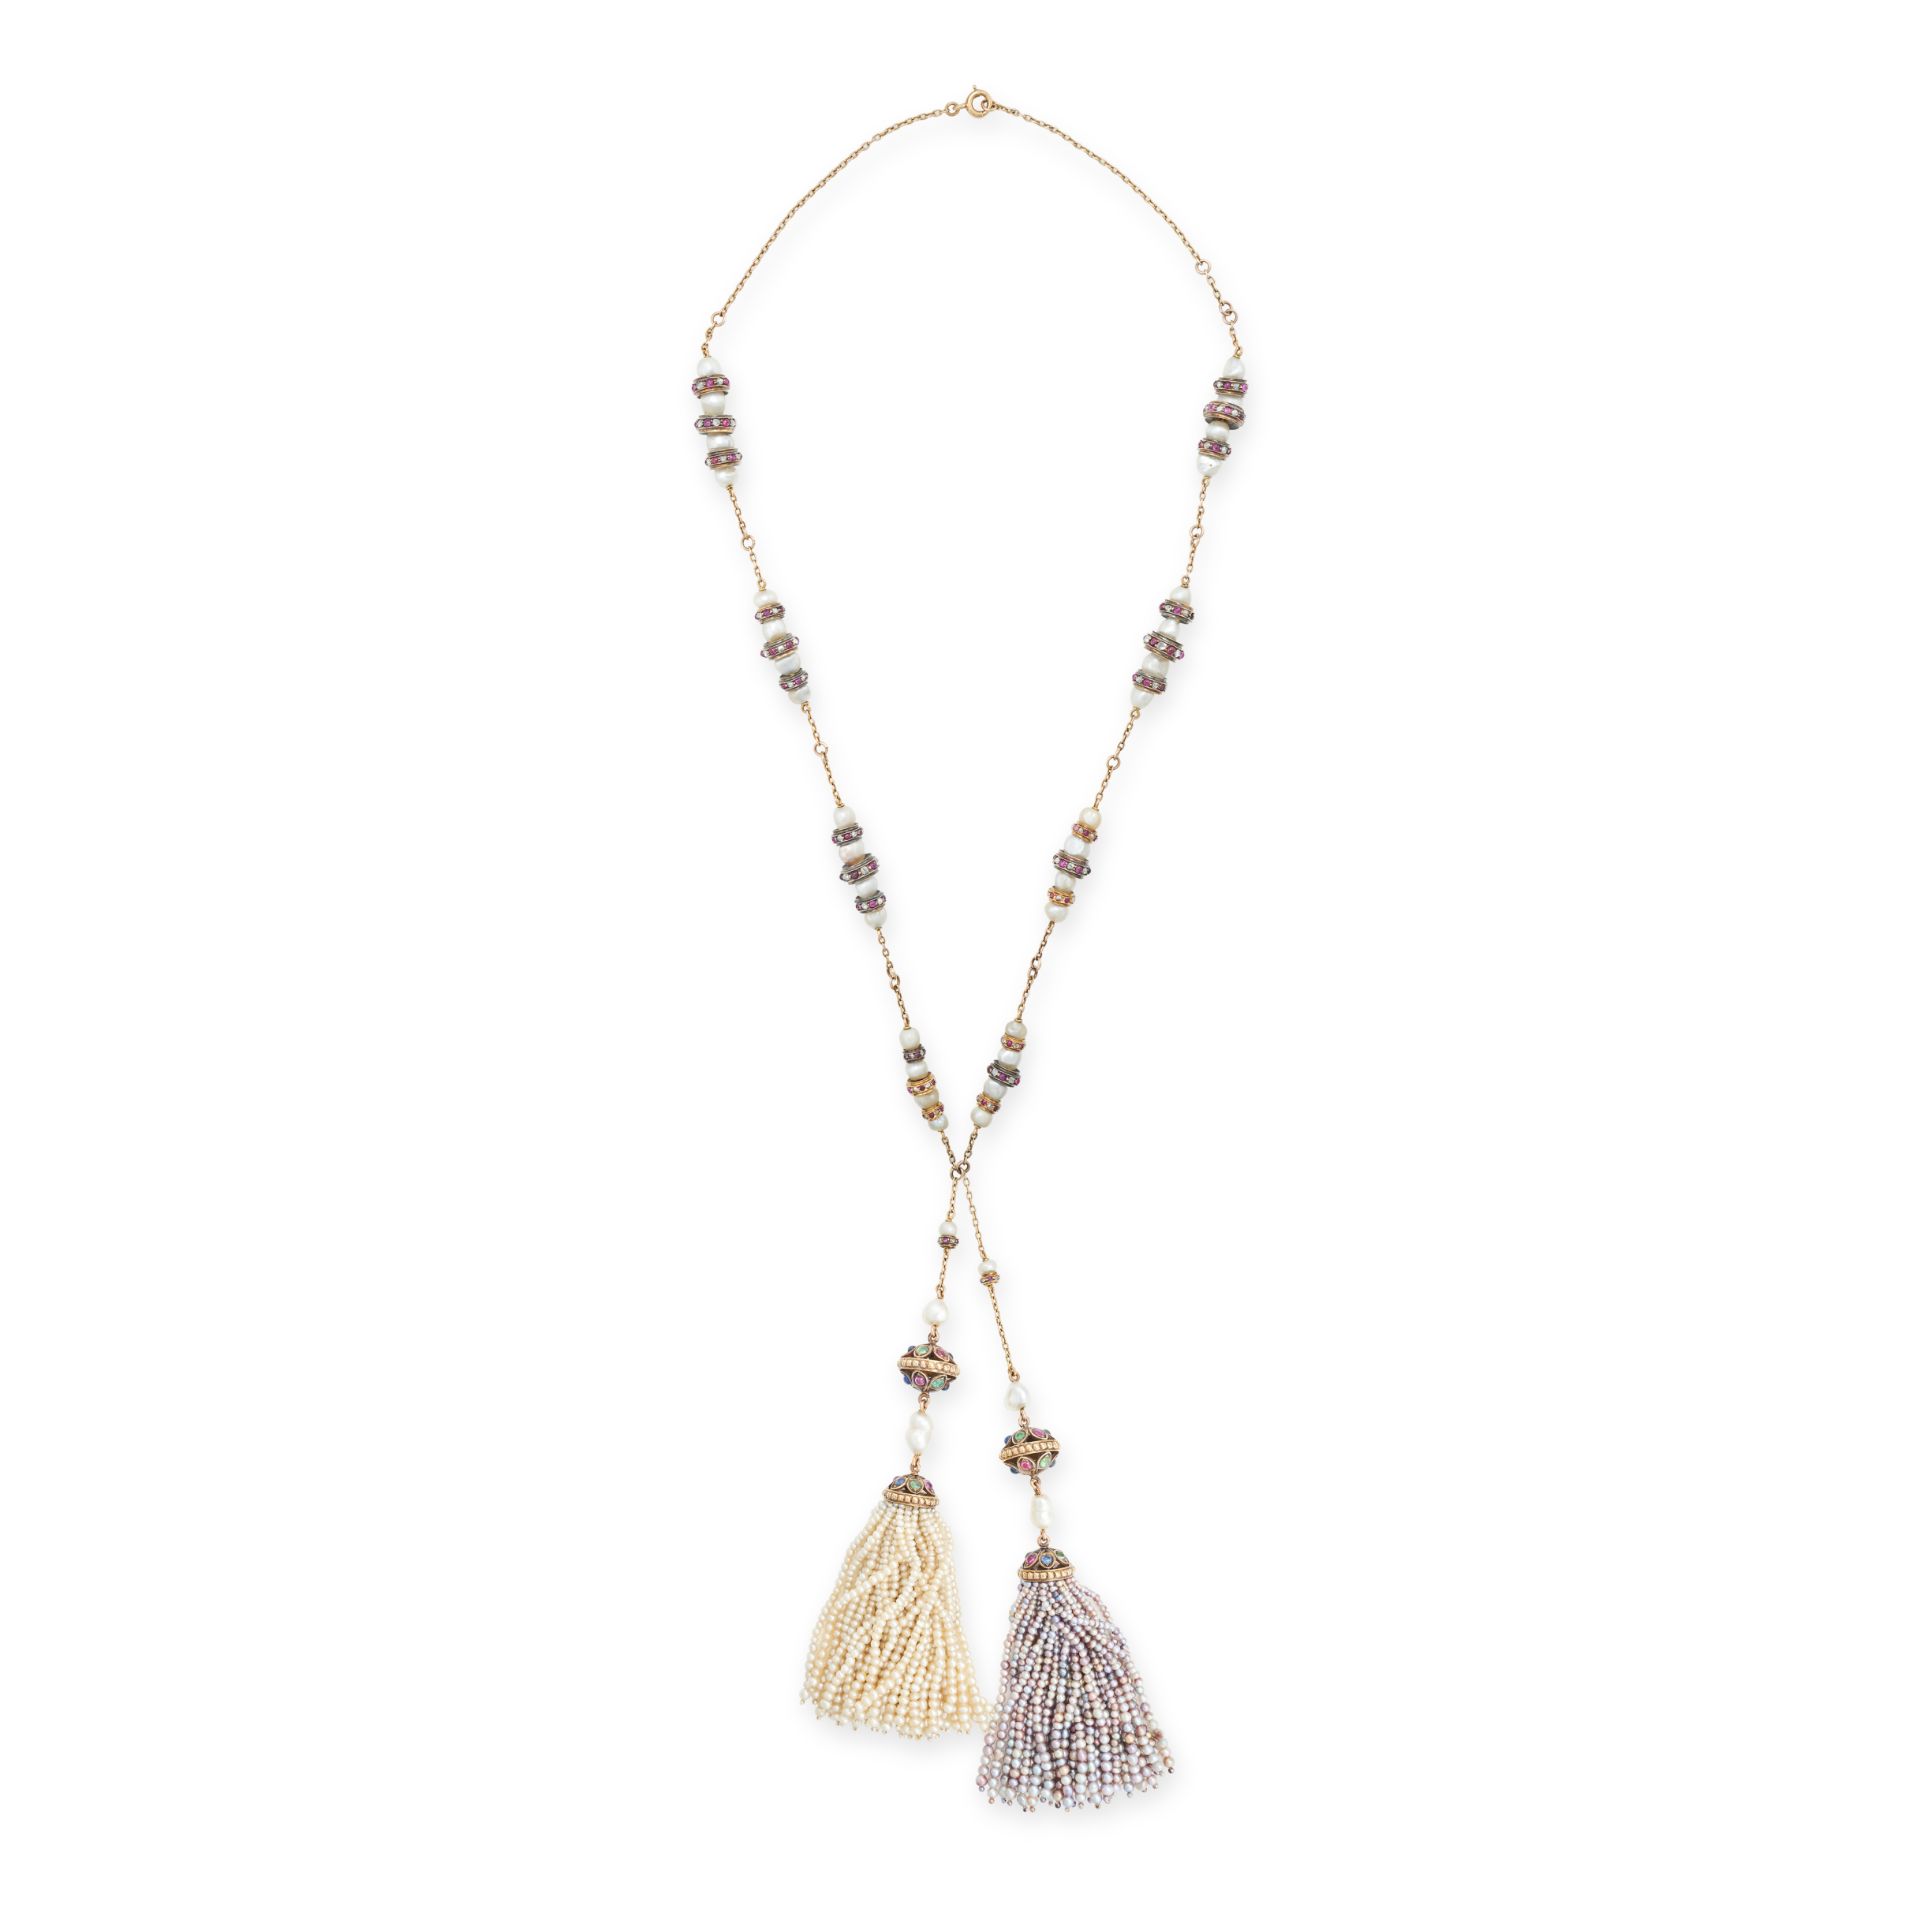 A FINE FRENCH GEMSET NATURAL PEARL TASSEL NECKLACE in yellow gold, the chain set with pearls and ... - Image 2 of 2